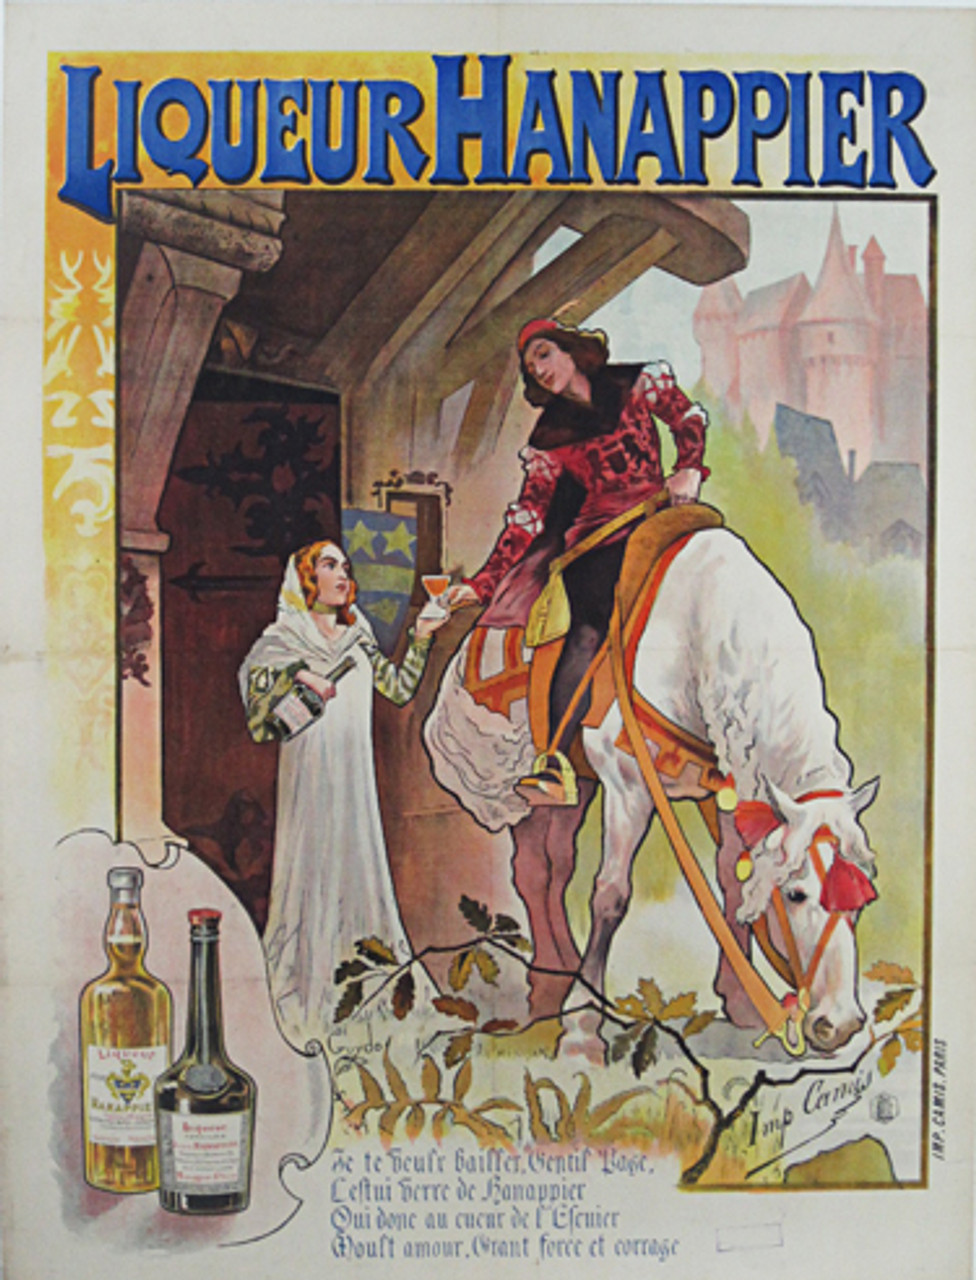 Liqueur Hanappier by Guydo from 1897 - French wine and spirits poster features a nobleman on a horse receiving a glass of liqueur from a women in white. We specialize in Original Vintage and Antique Posters.